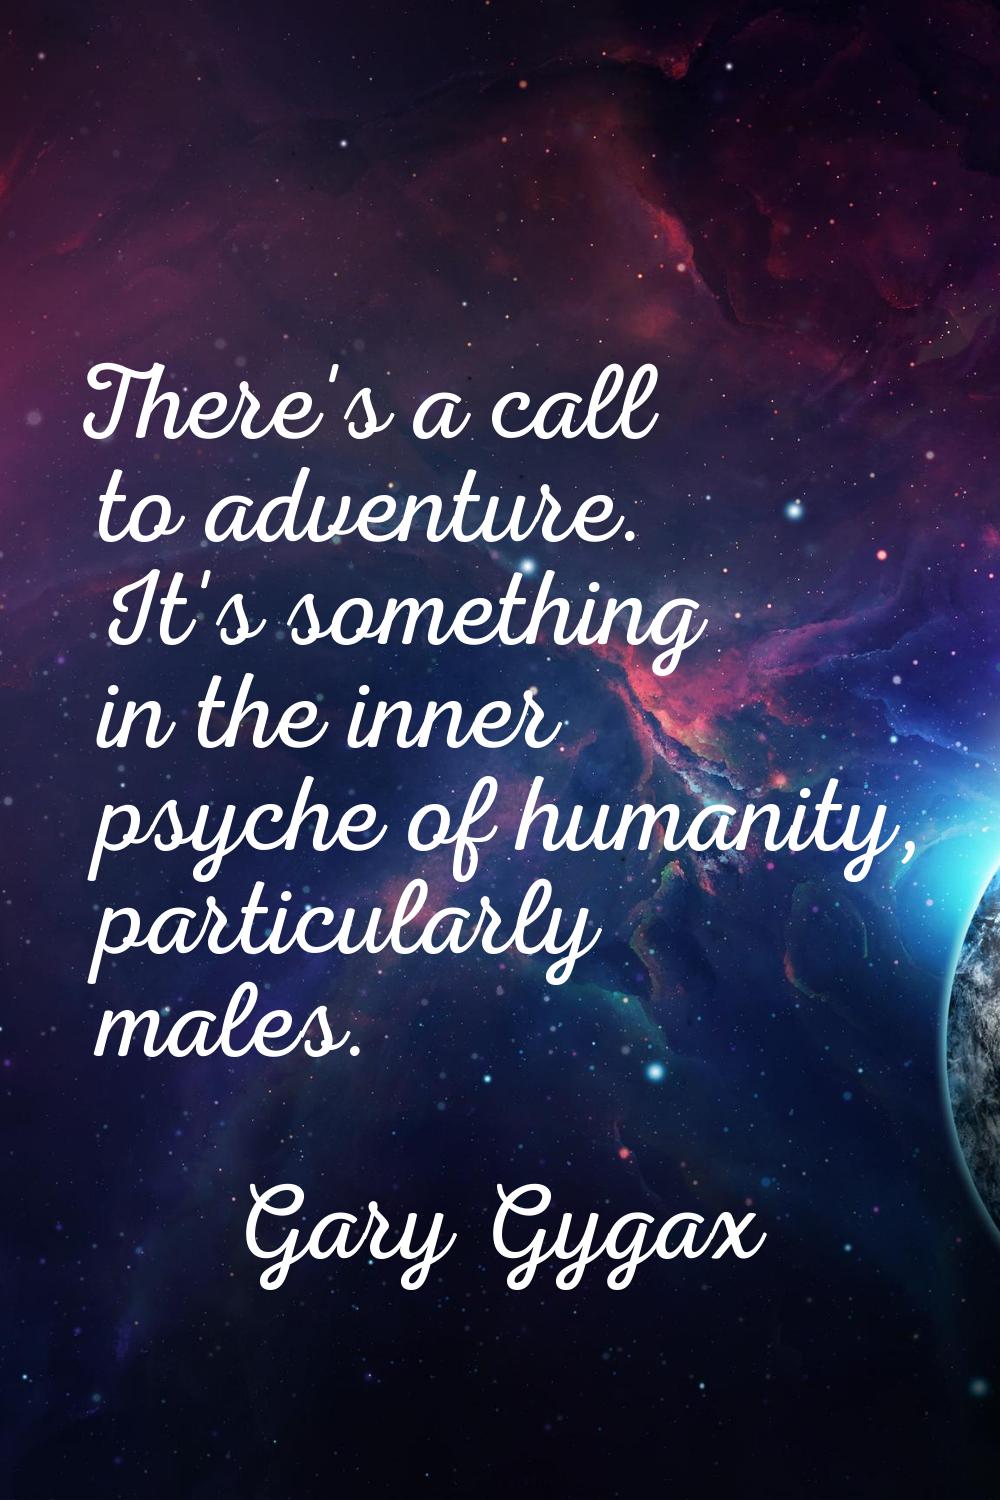 There's a call to adventure. It's something in the inner psyche of humanity, particularly males.